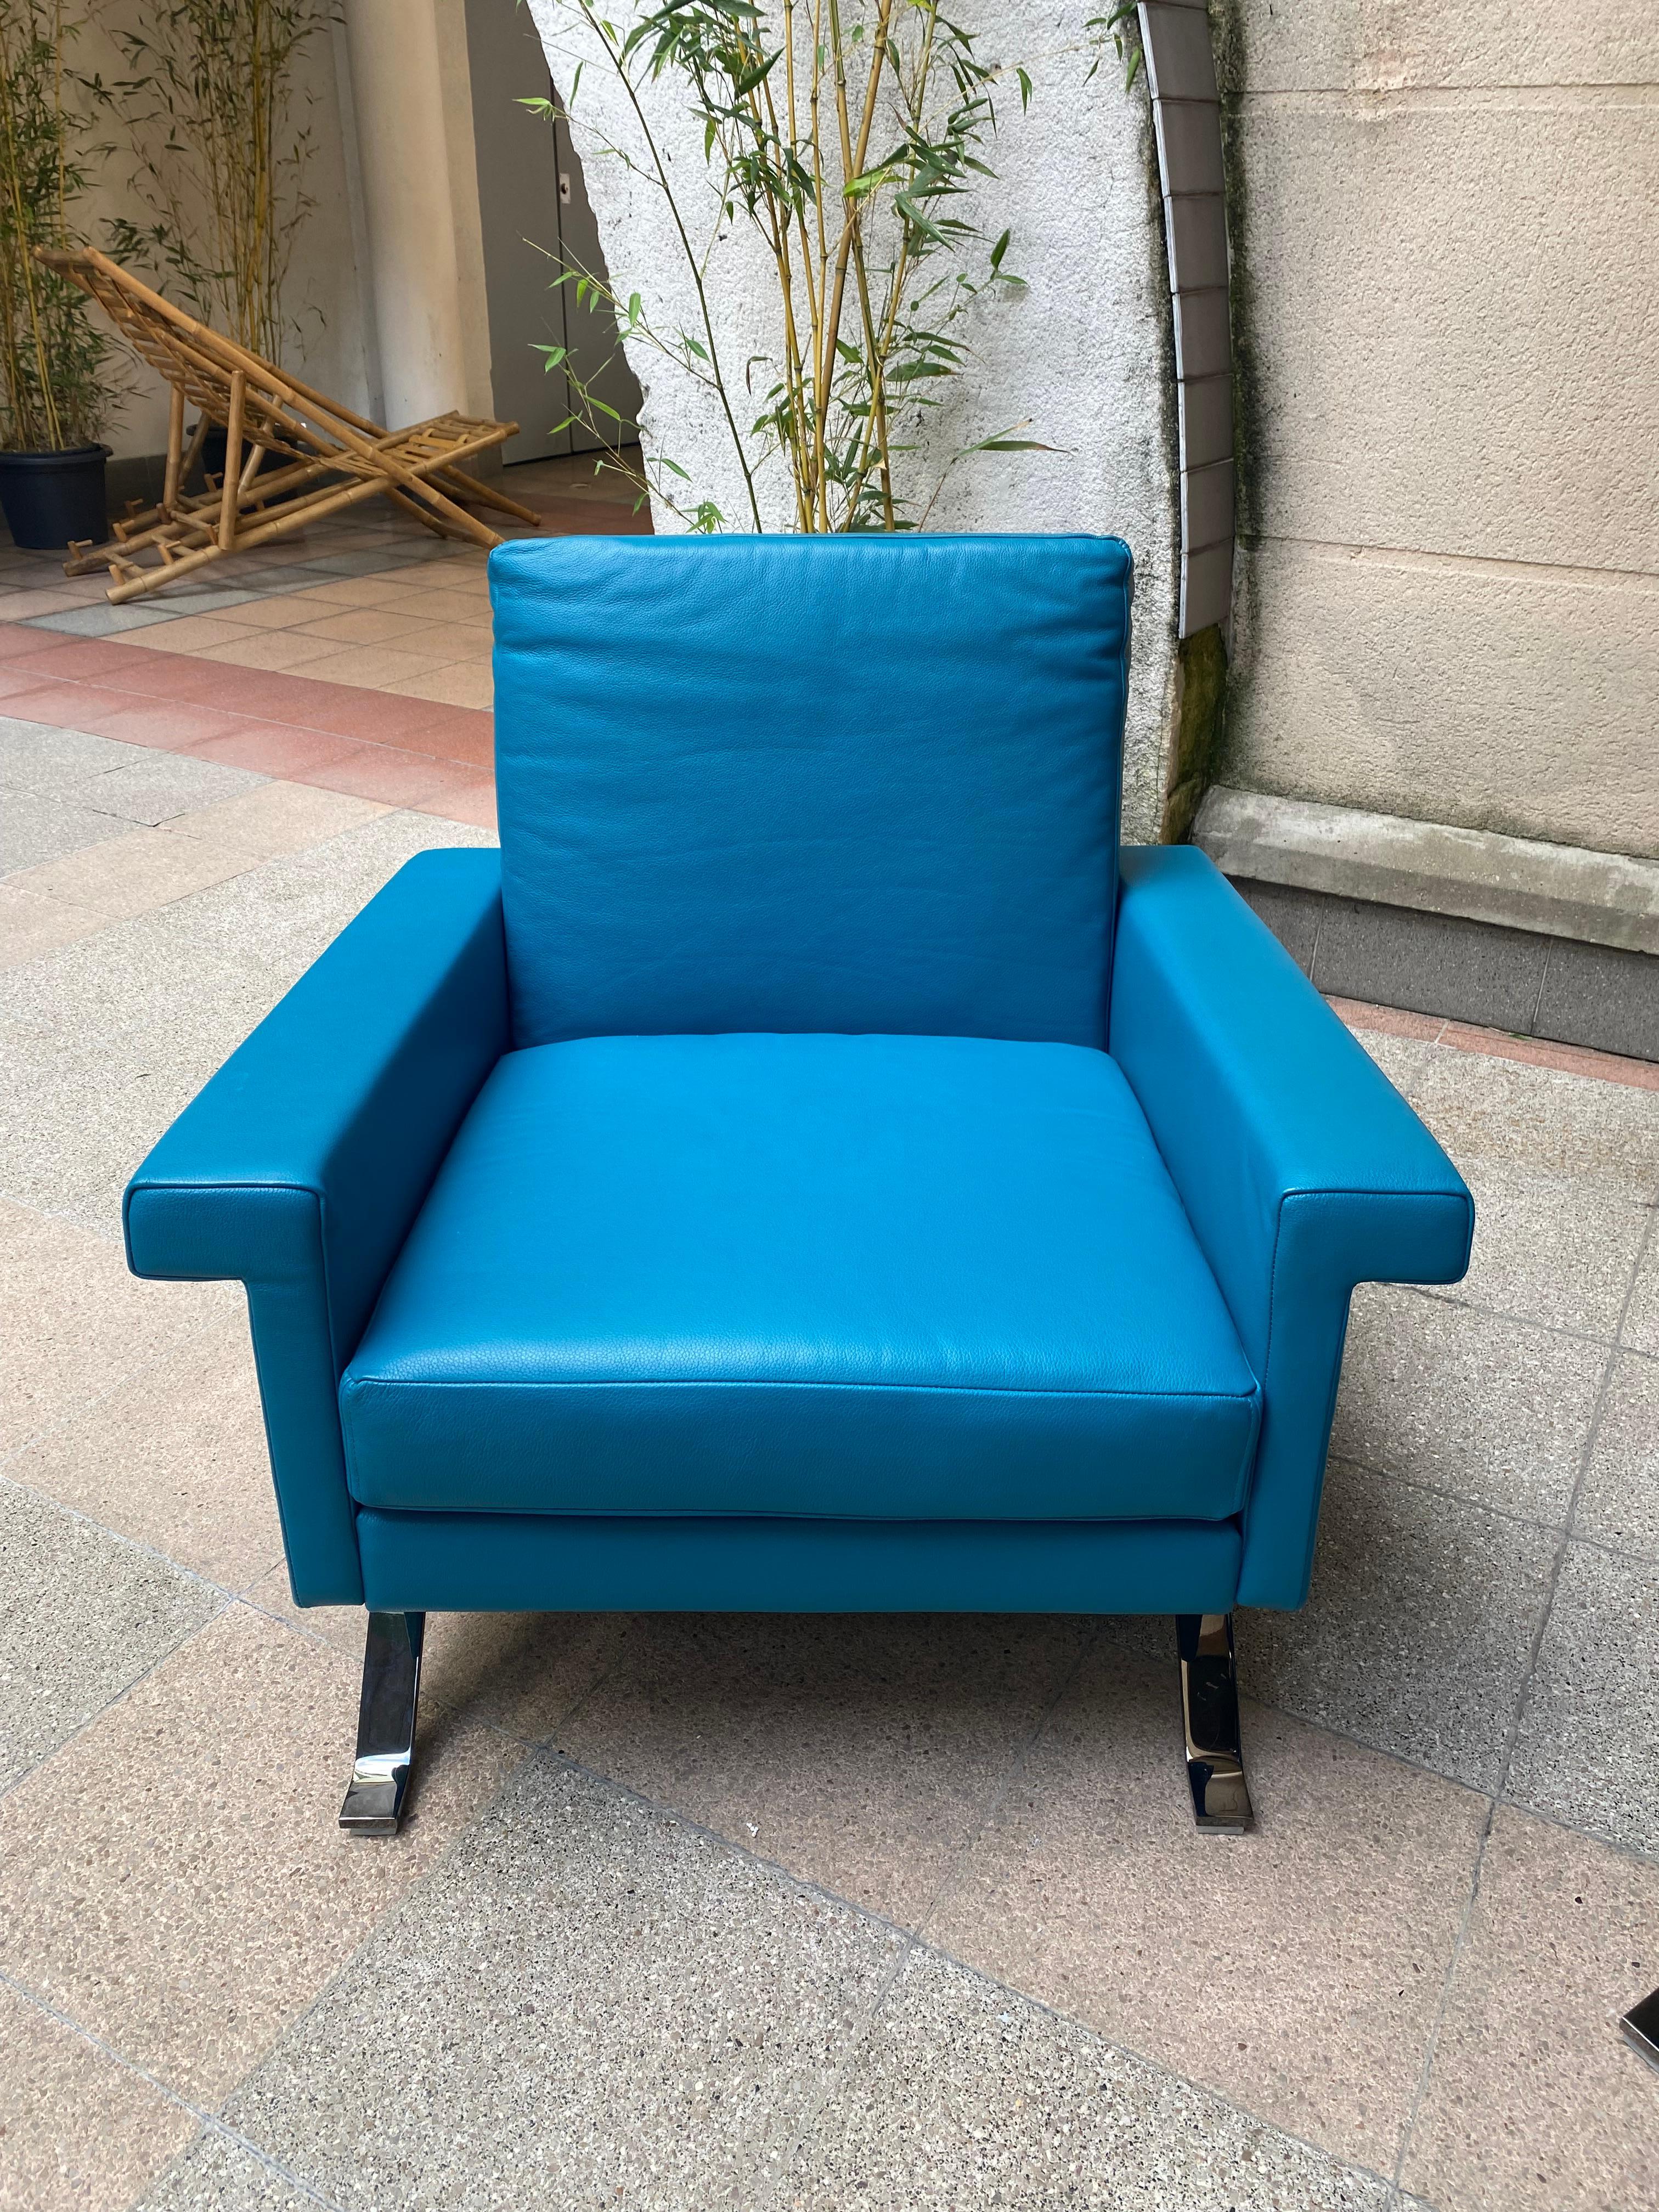 Ico Parisi
Pair of armchairs - Lounge ´875´
Cassina Edition
Design 1960
Petroleum blue leather / stainless steel
L 79 x l 84 x h 76 cm
Seat height 39 cm
25 kgs each
New condition
Never served
Price: 6900 euros per pair